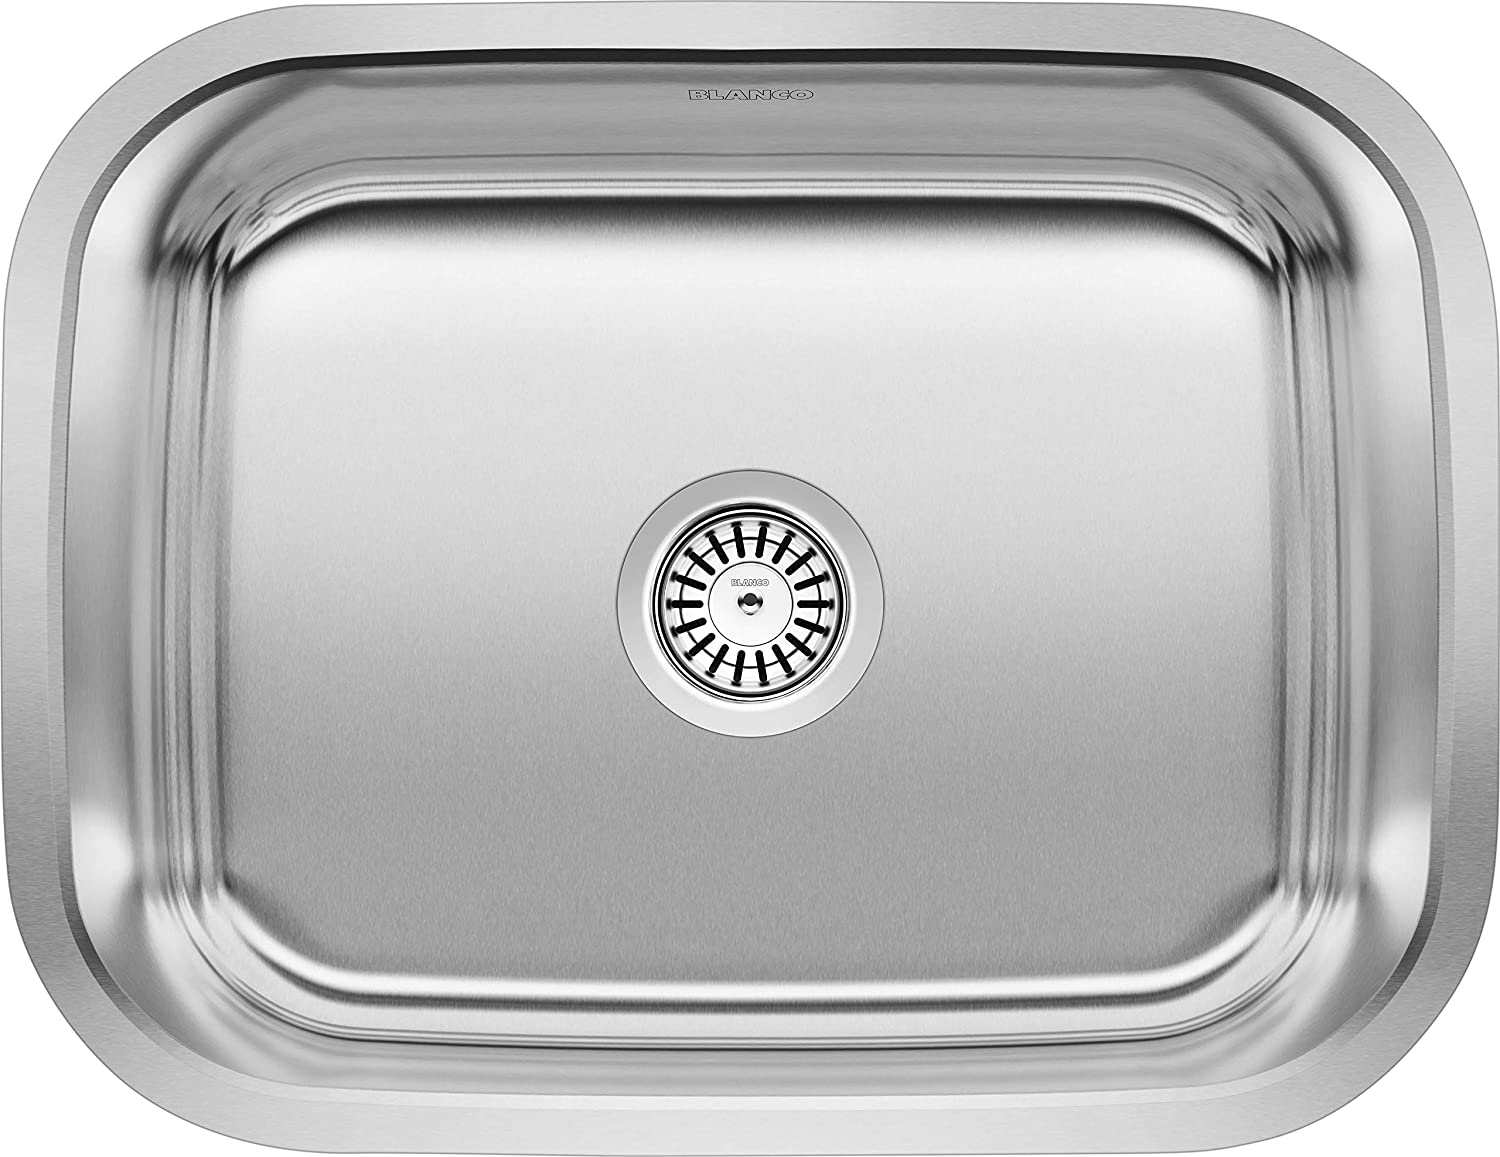 Blanco Stellar Single Bowl Undermount Laundry Sink in Brushed Stainless Steel